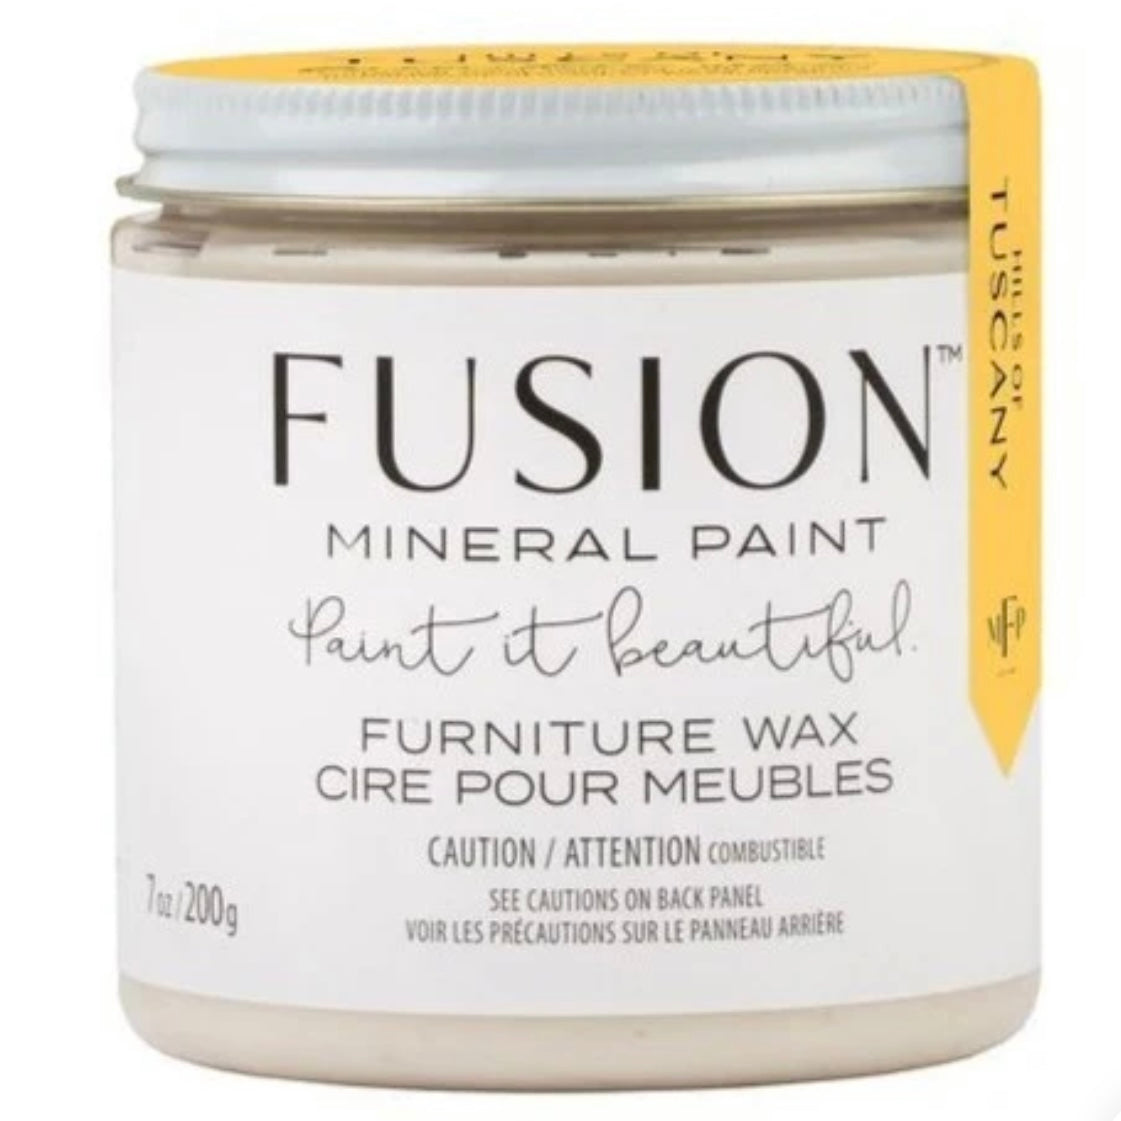 Scented Furniture Wax